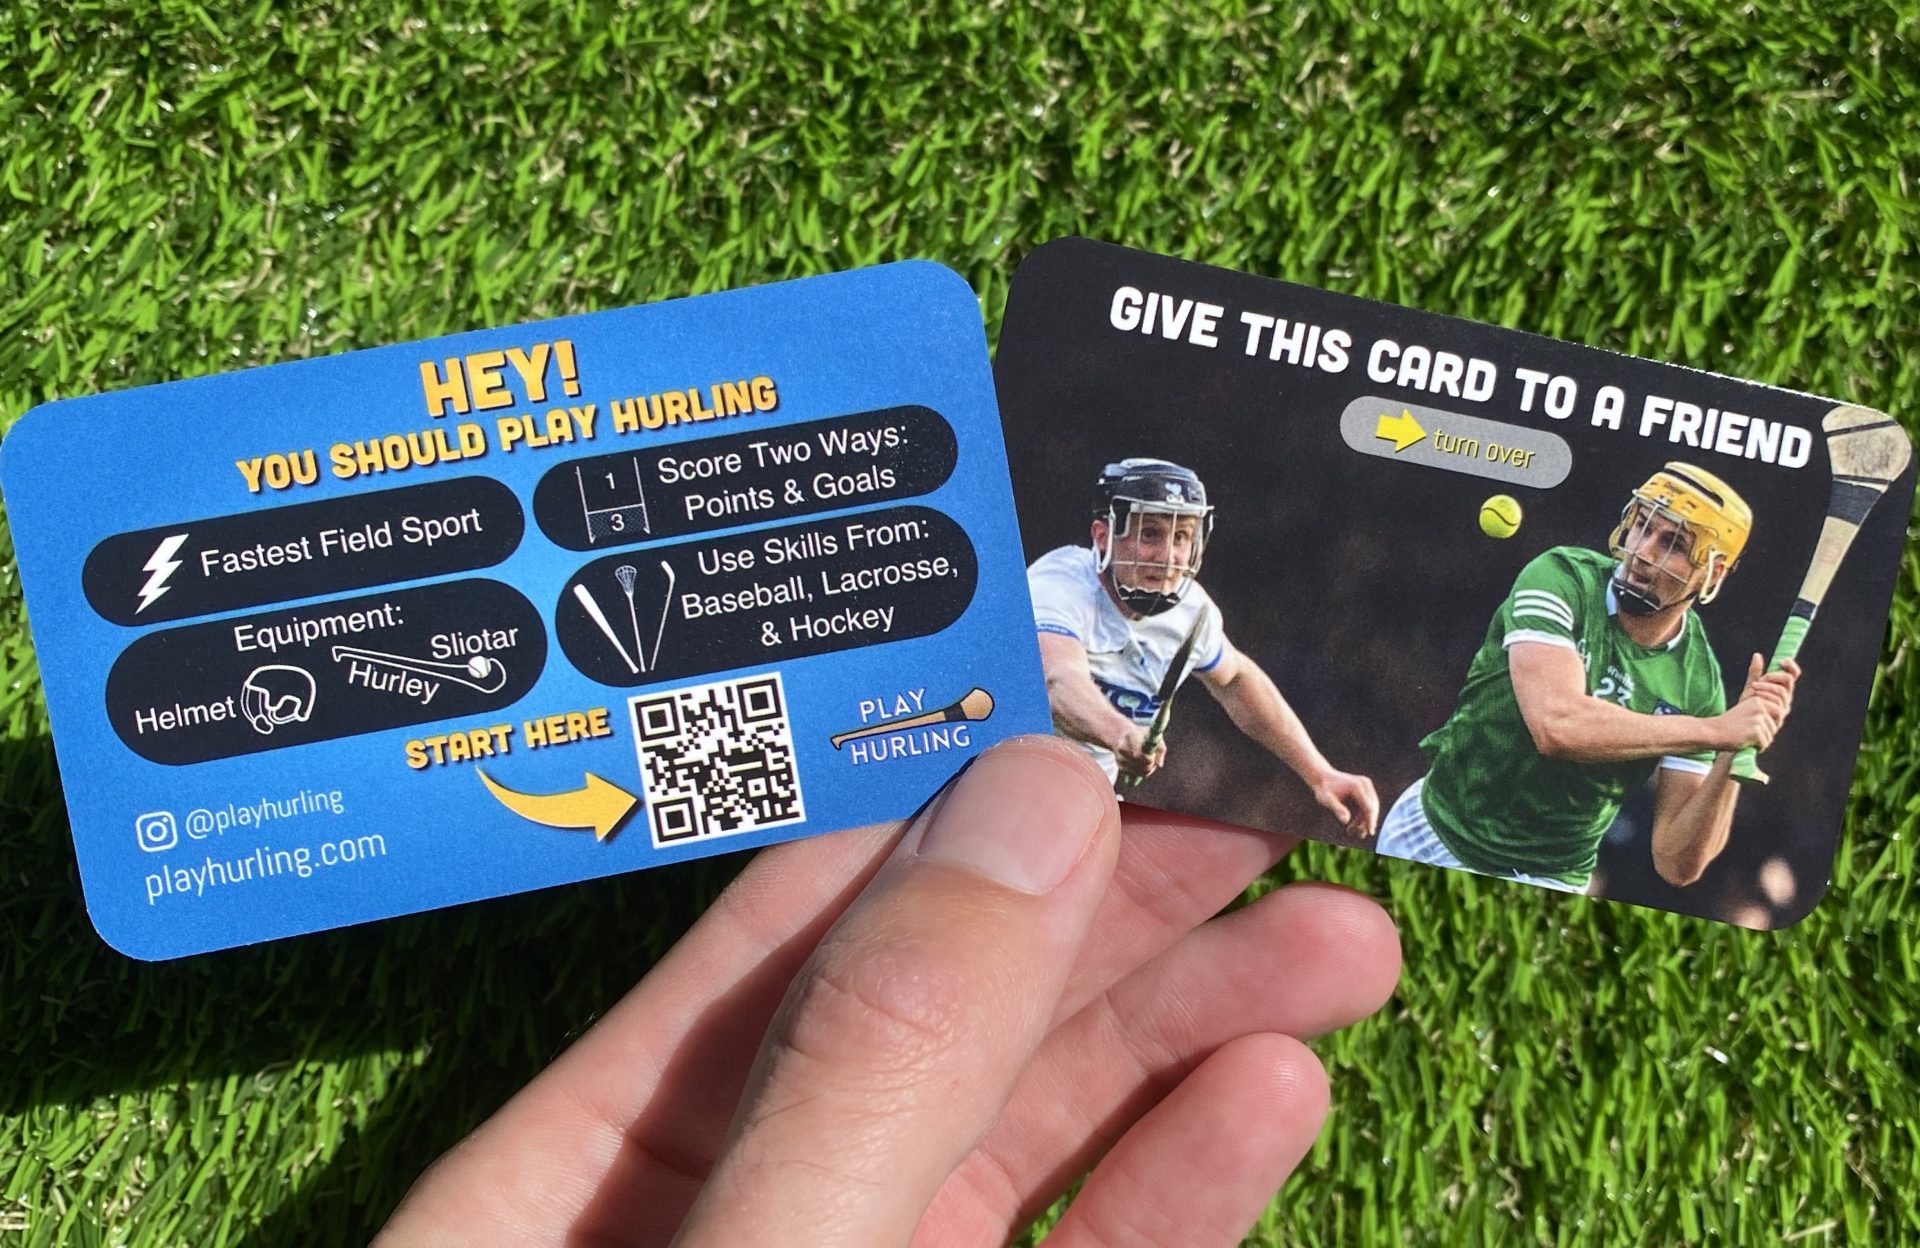 You Should Play Hurling - Give This Card To A Friend